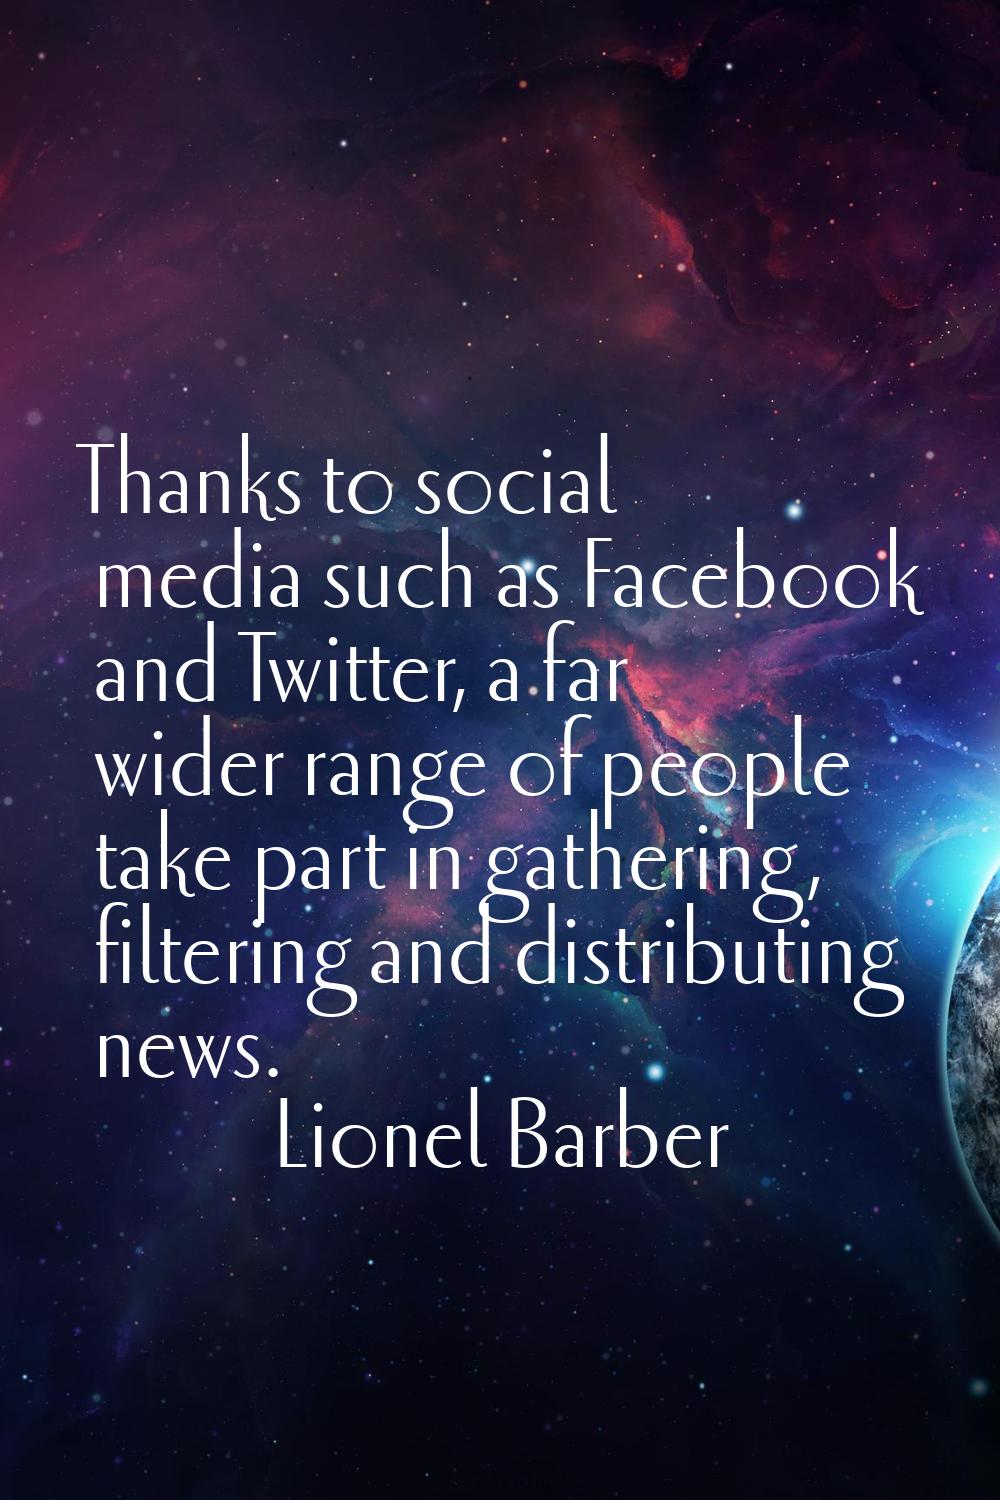 Thanks to social media such as Facebook and Twitter, a far wider range of people take part in gathe